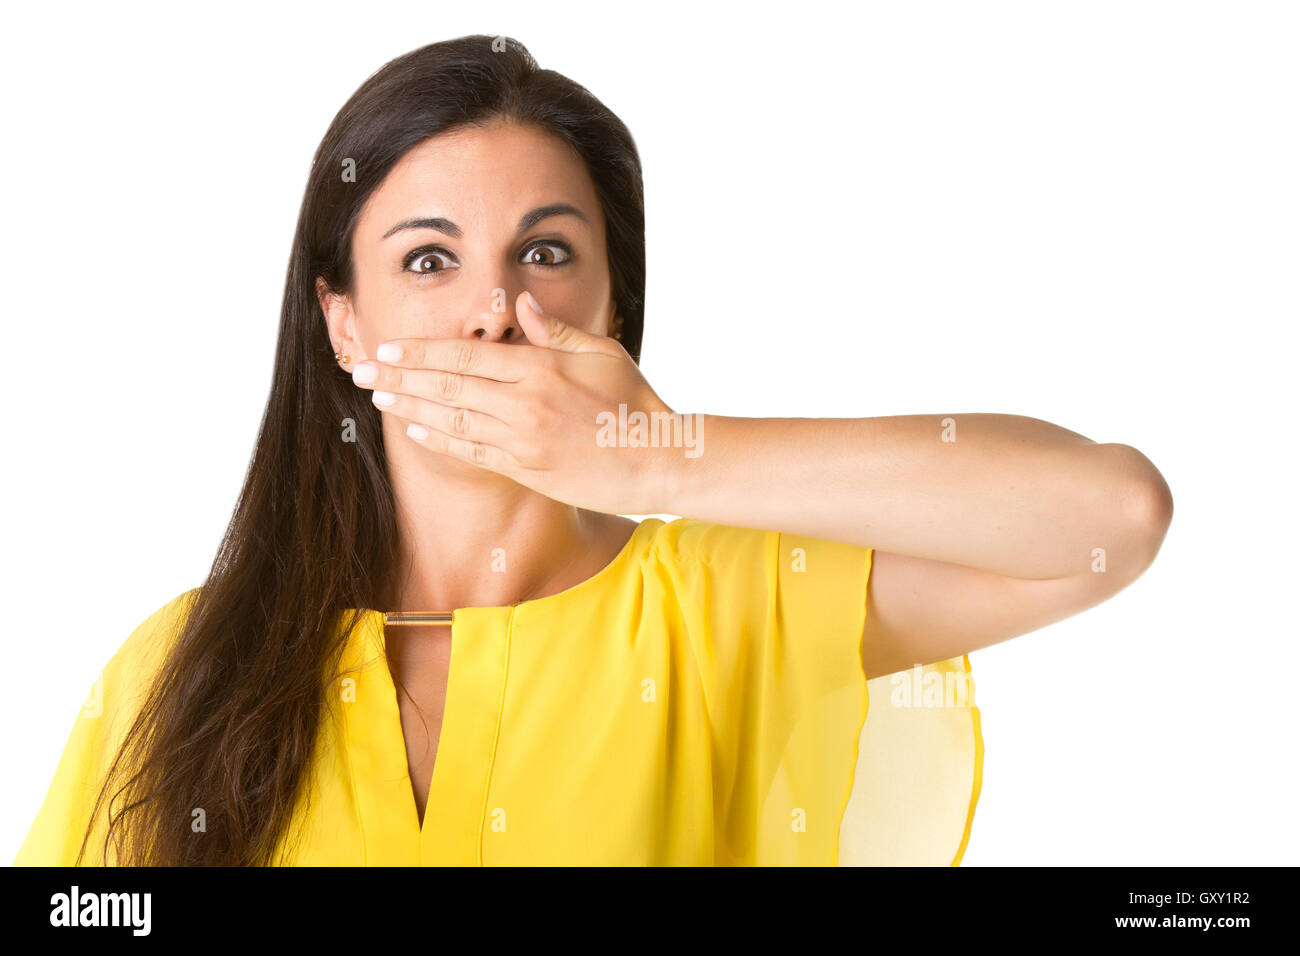 Female covering her mouth with her hand, isolated in white Stock Photo